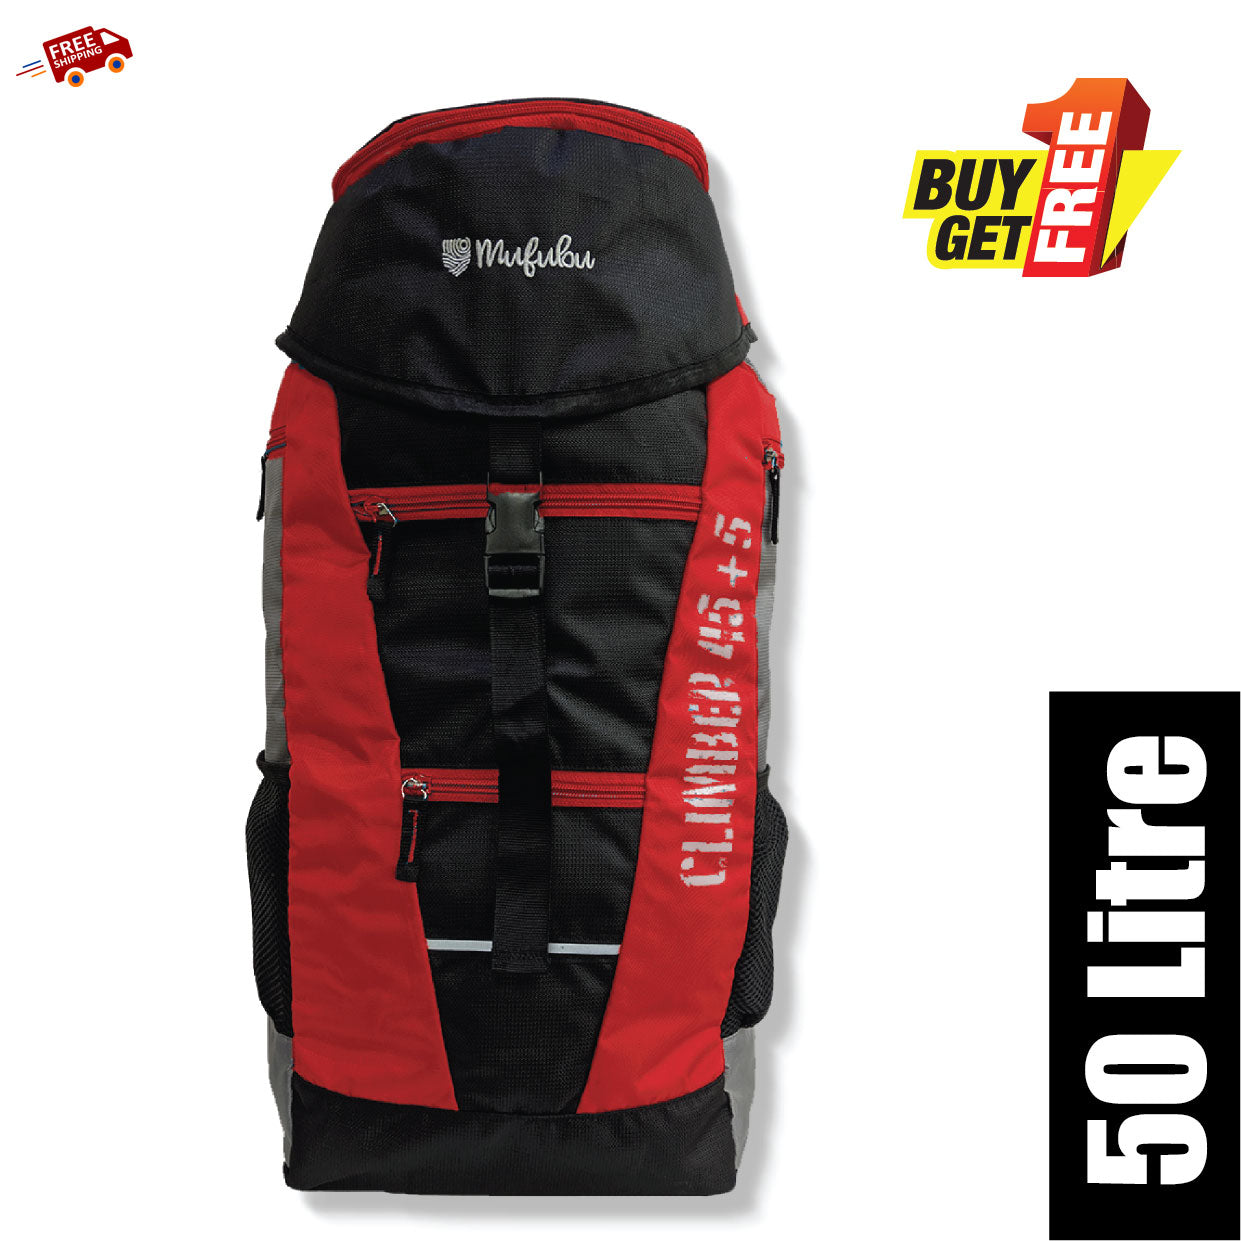 Climber 45 + 5 LTR Rucksack with Rain Cover (Black/Red)